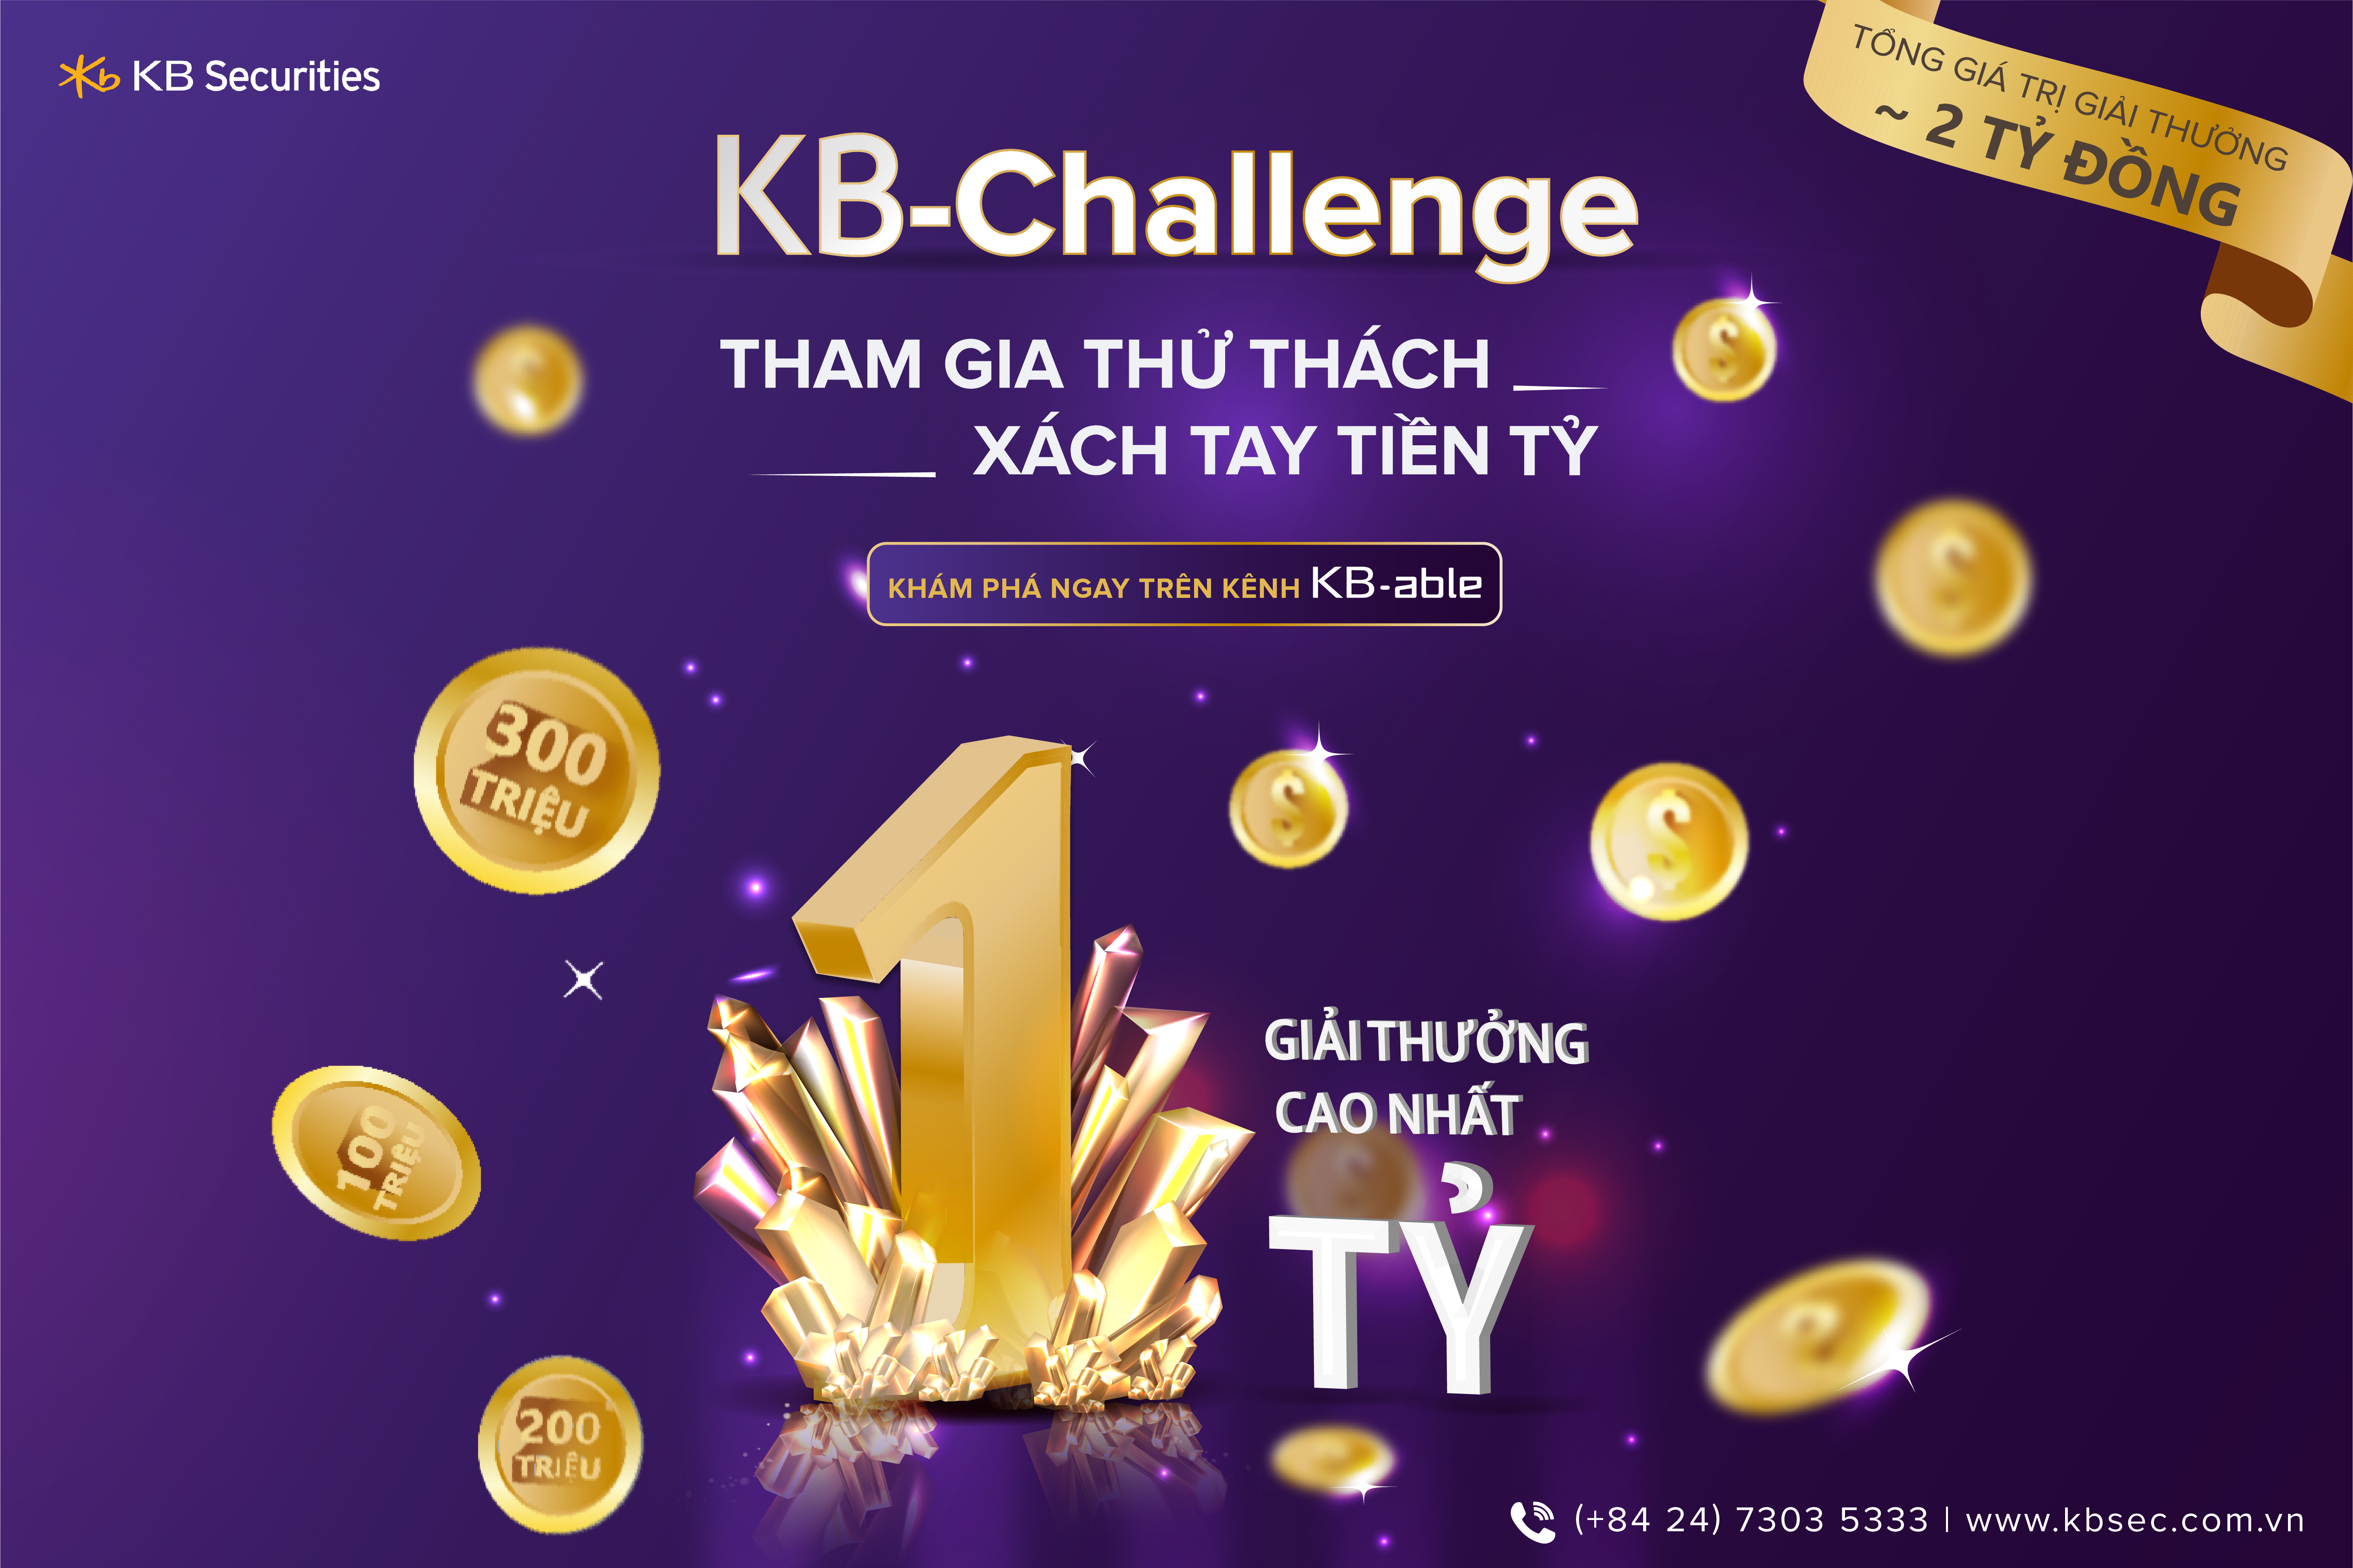 KB-Challenge - Award VND 1 billion is looking for the champion